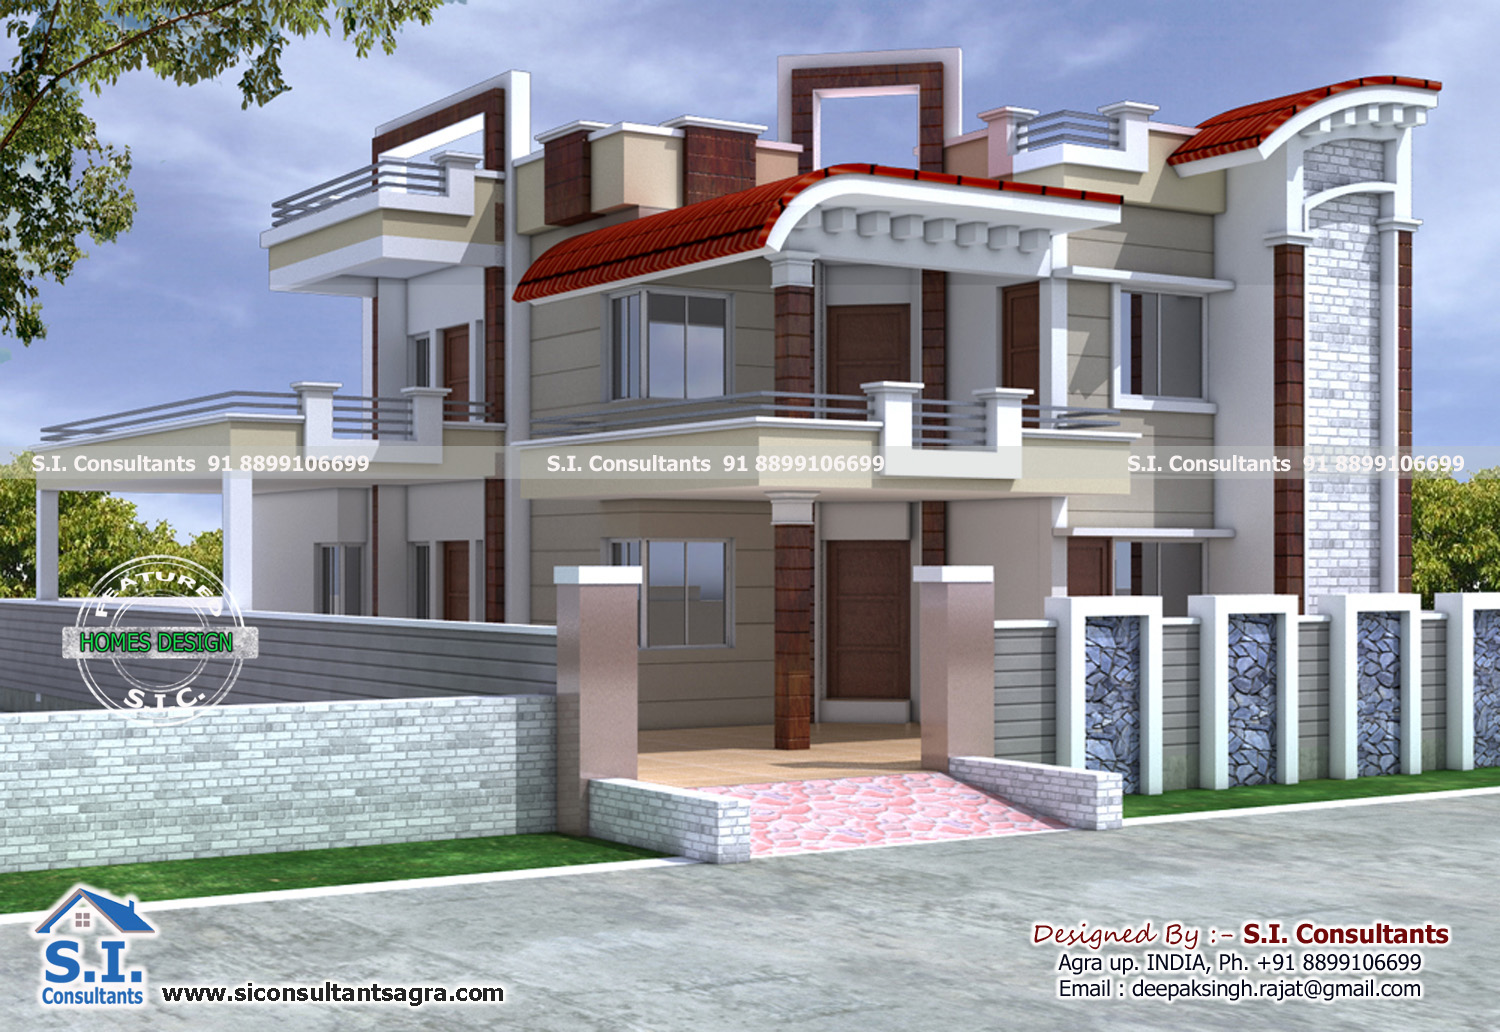 S.I. consultants: 45x75 Indian House design